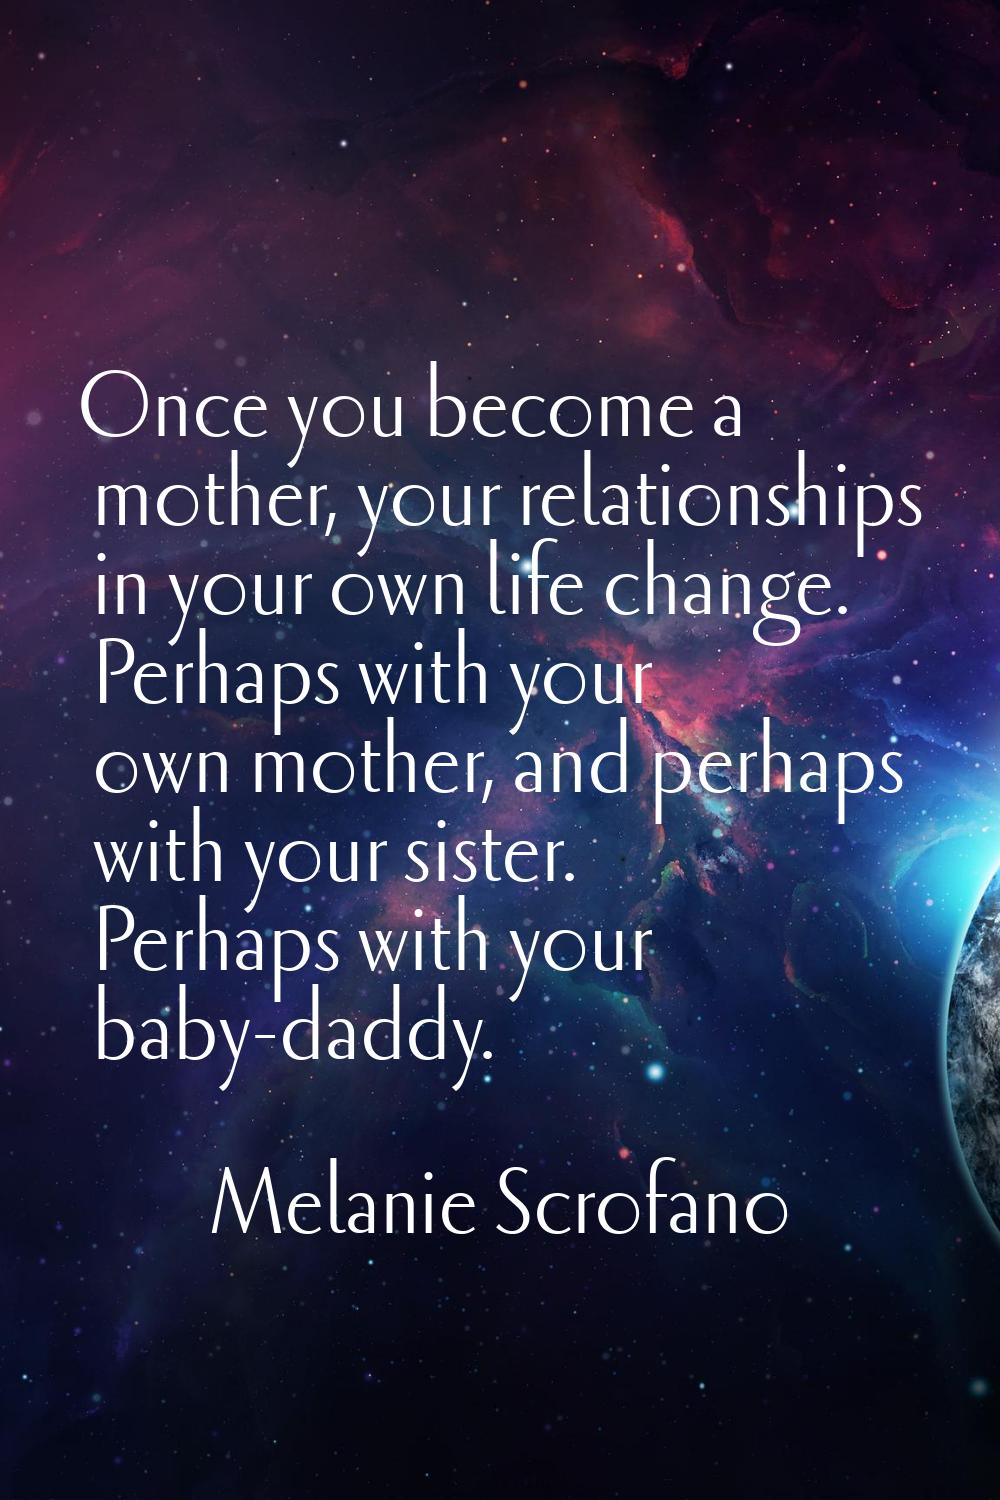 Once you become a mother, your relationships in your own life change. Perhaps with your own mother,